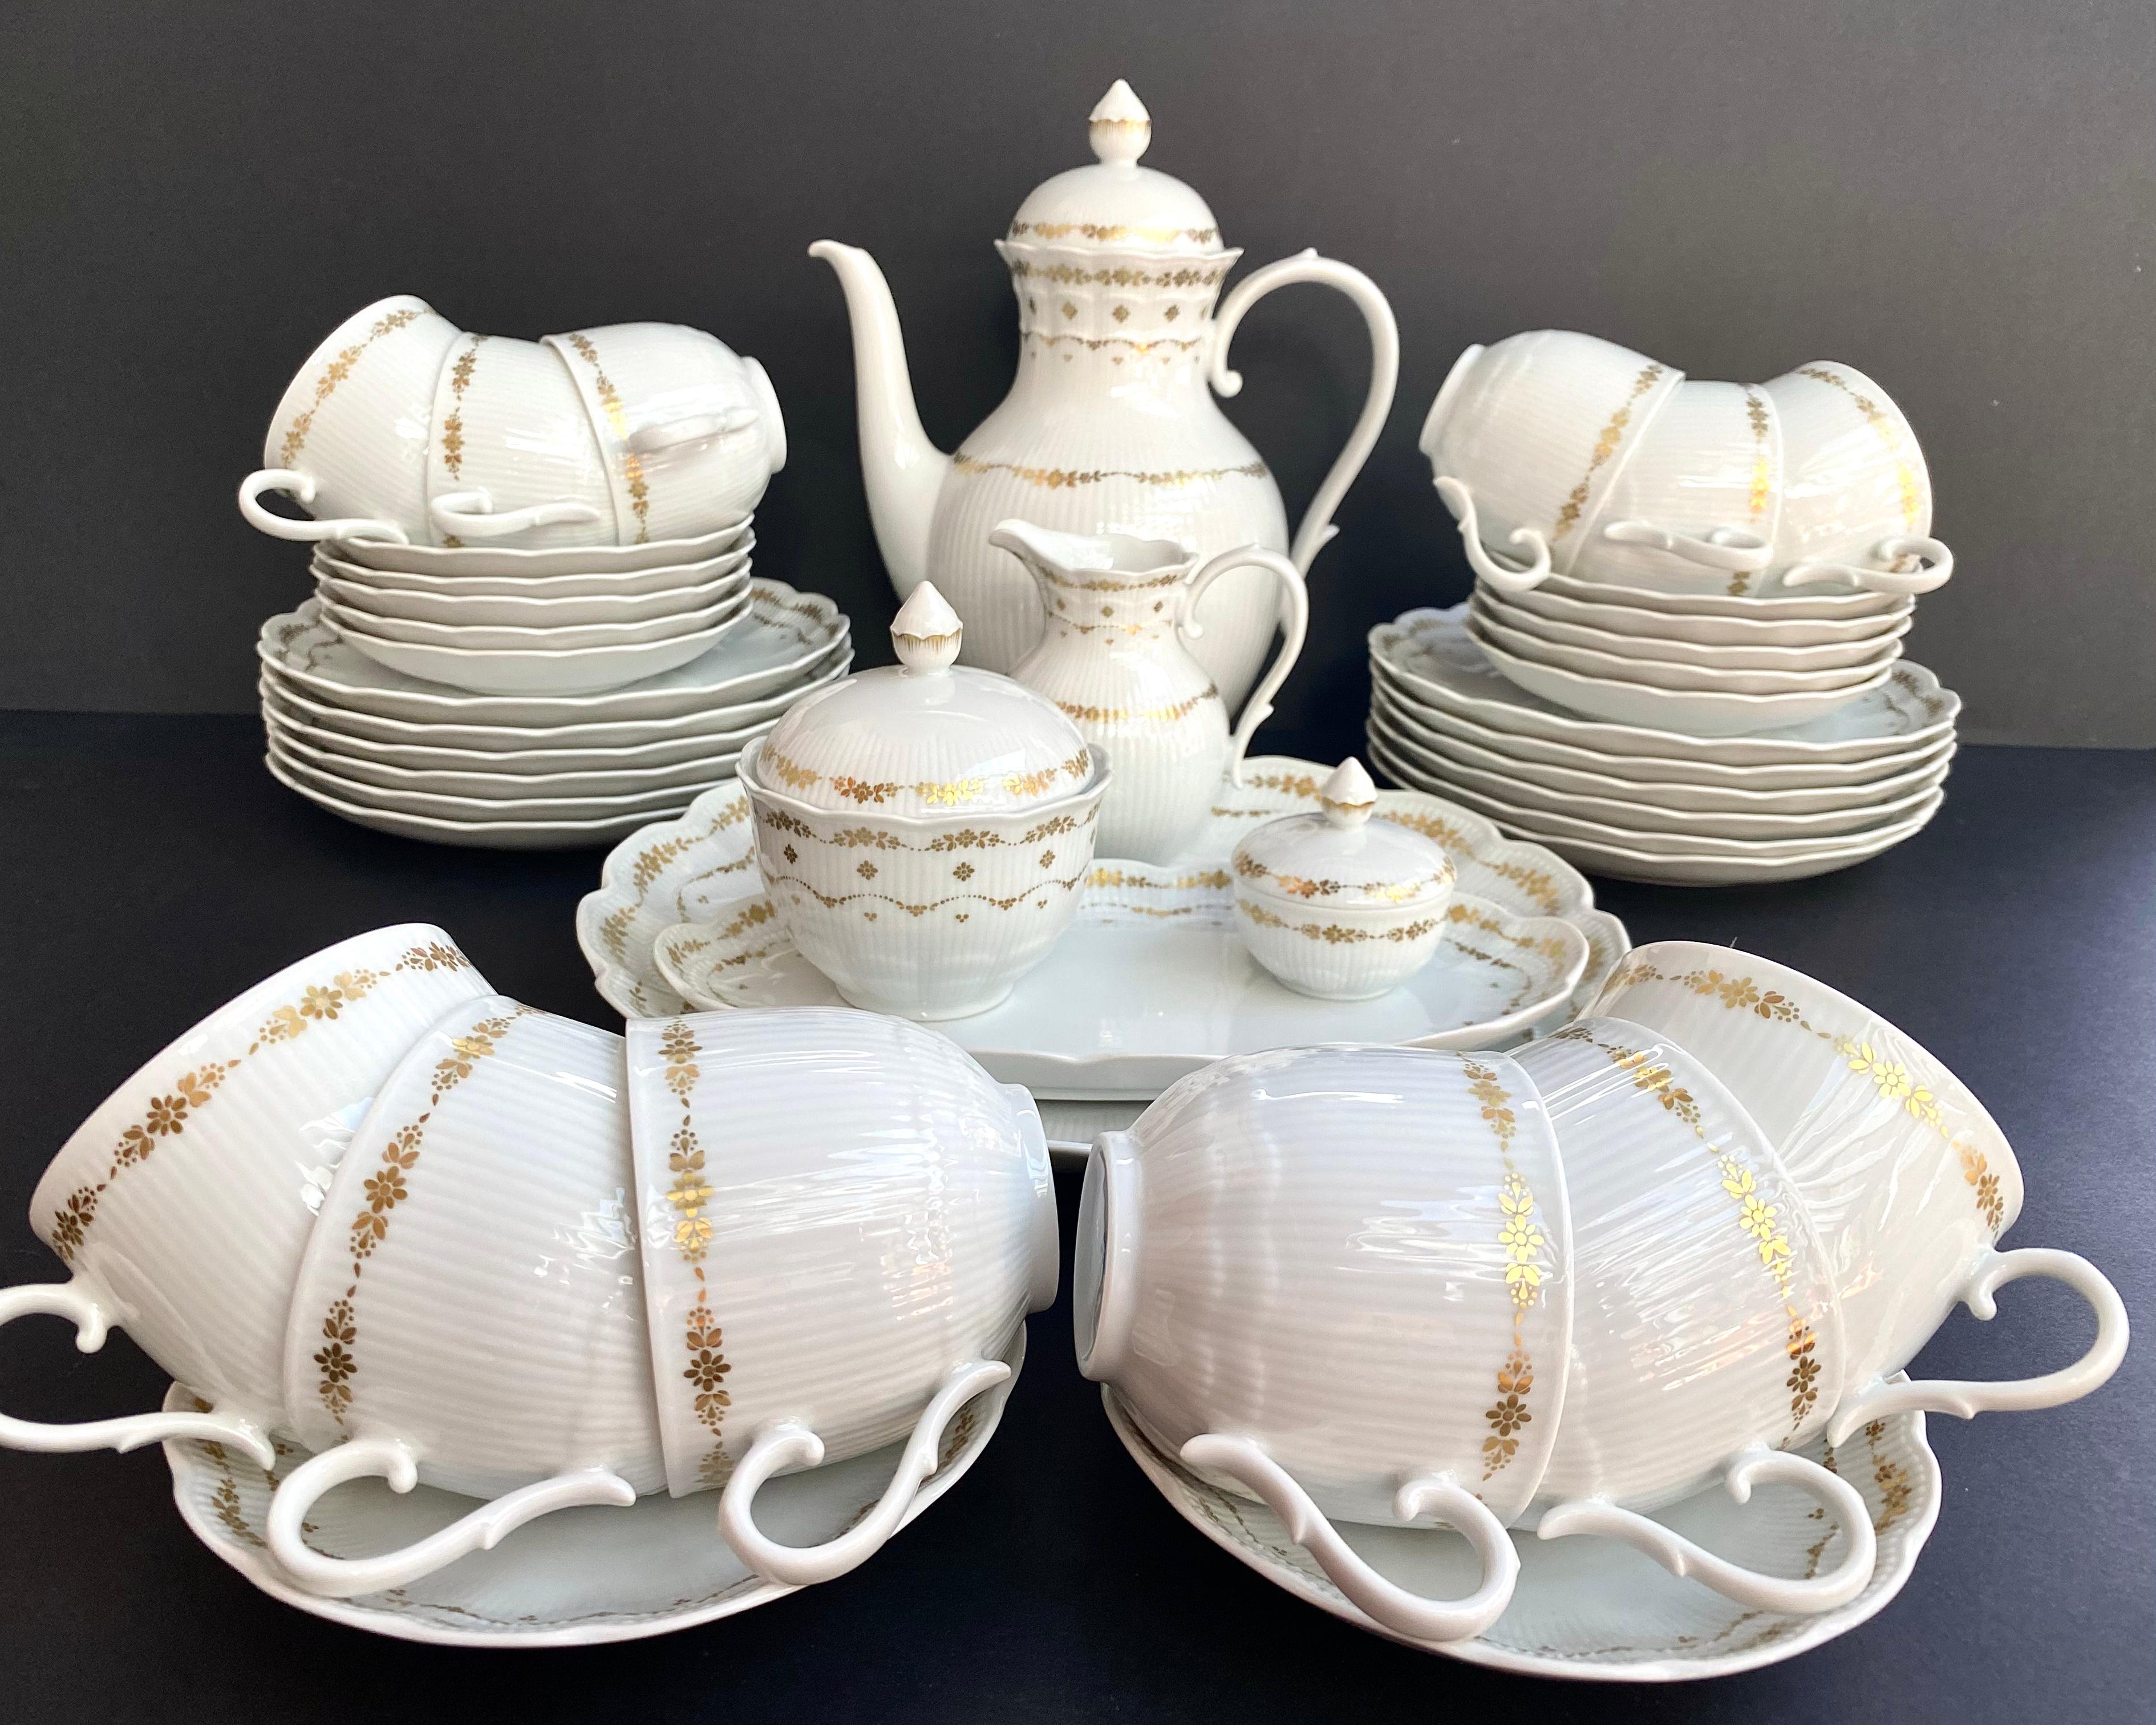 Vintage Coffee service for 12 person, 42 pieces from the famous AK Kaiser manufactory West Germany, 
Romantica Collection, Monte Carlo series, 1970-1980s.

The service made of high quality bone china porcelain.

Gilded underglaze decor.

Each piece